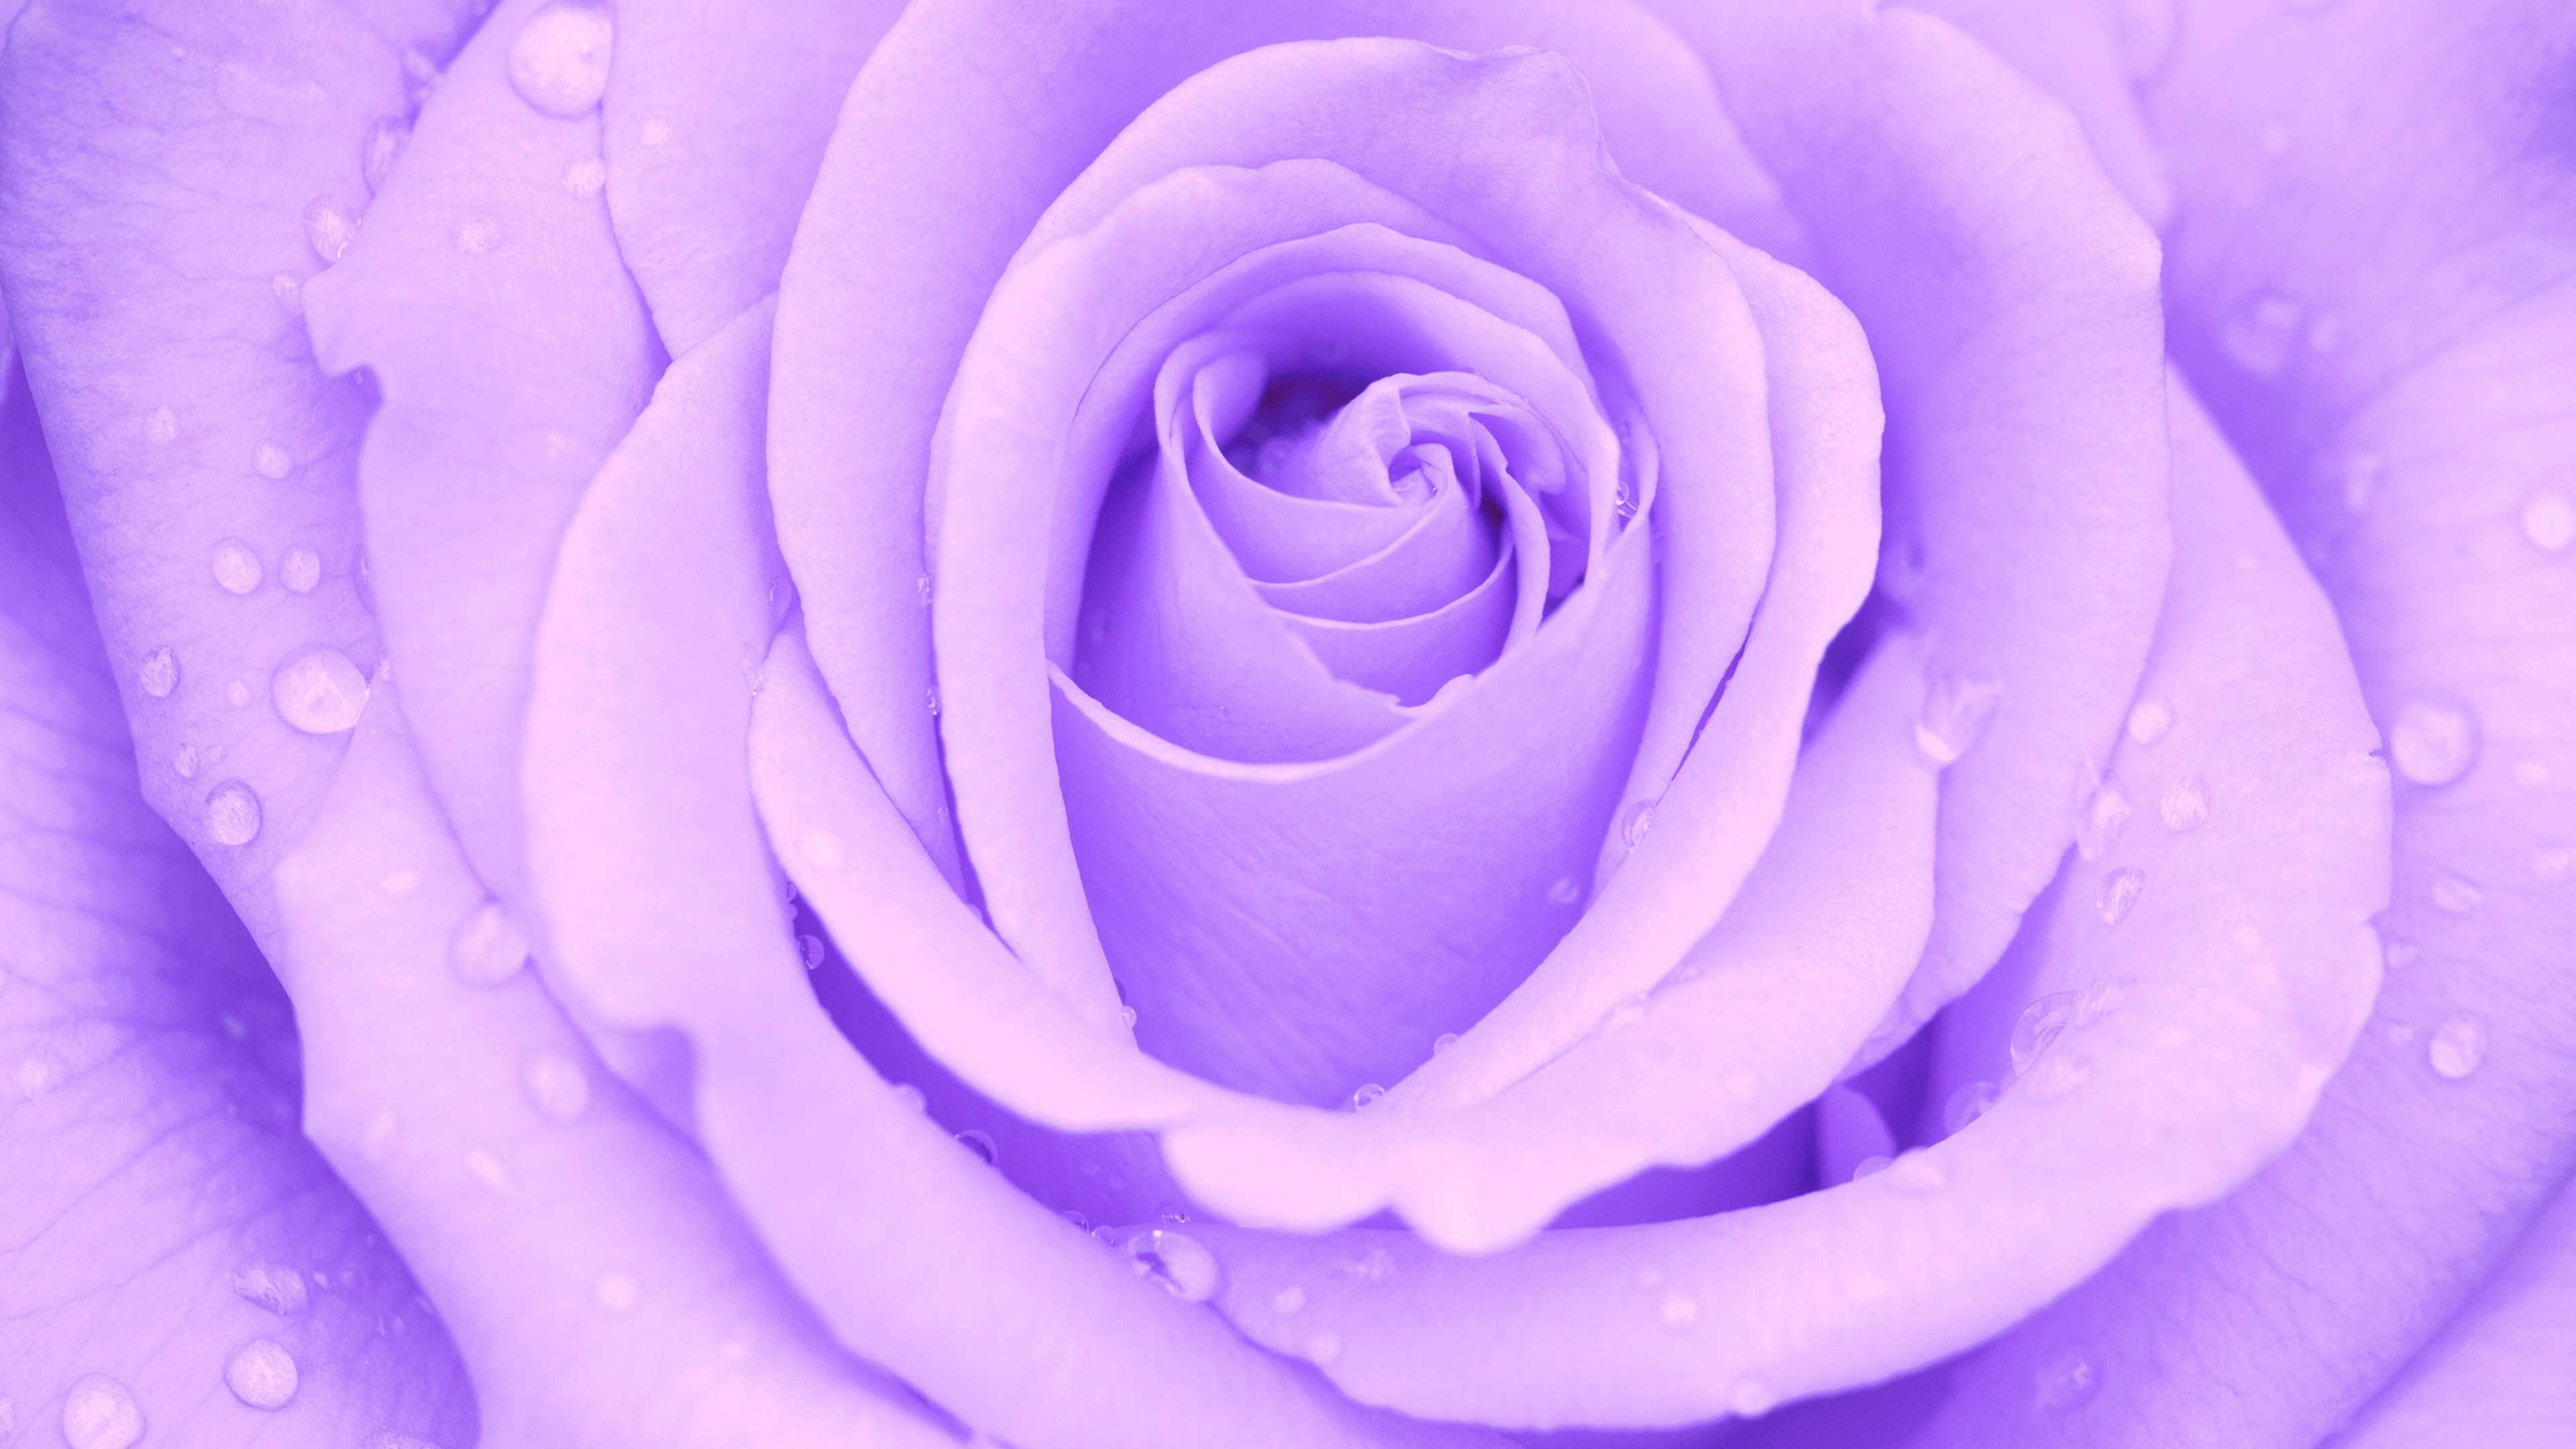 A close up of a purple rose with water droplets on it - Light purple